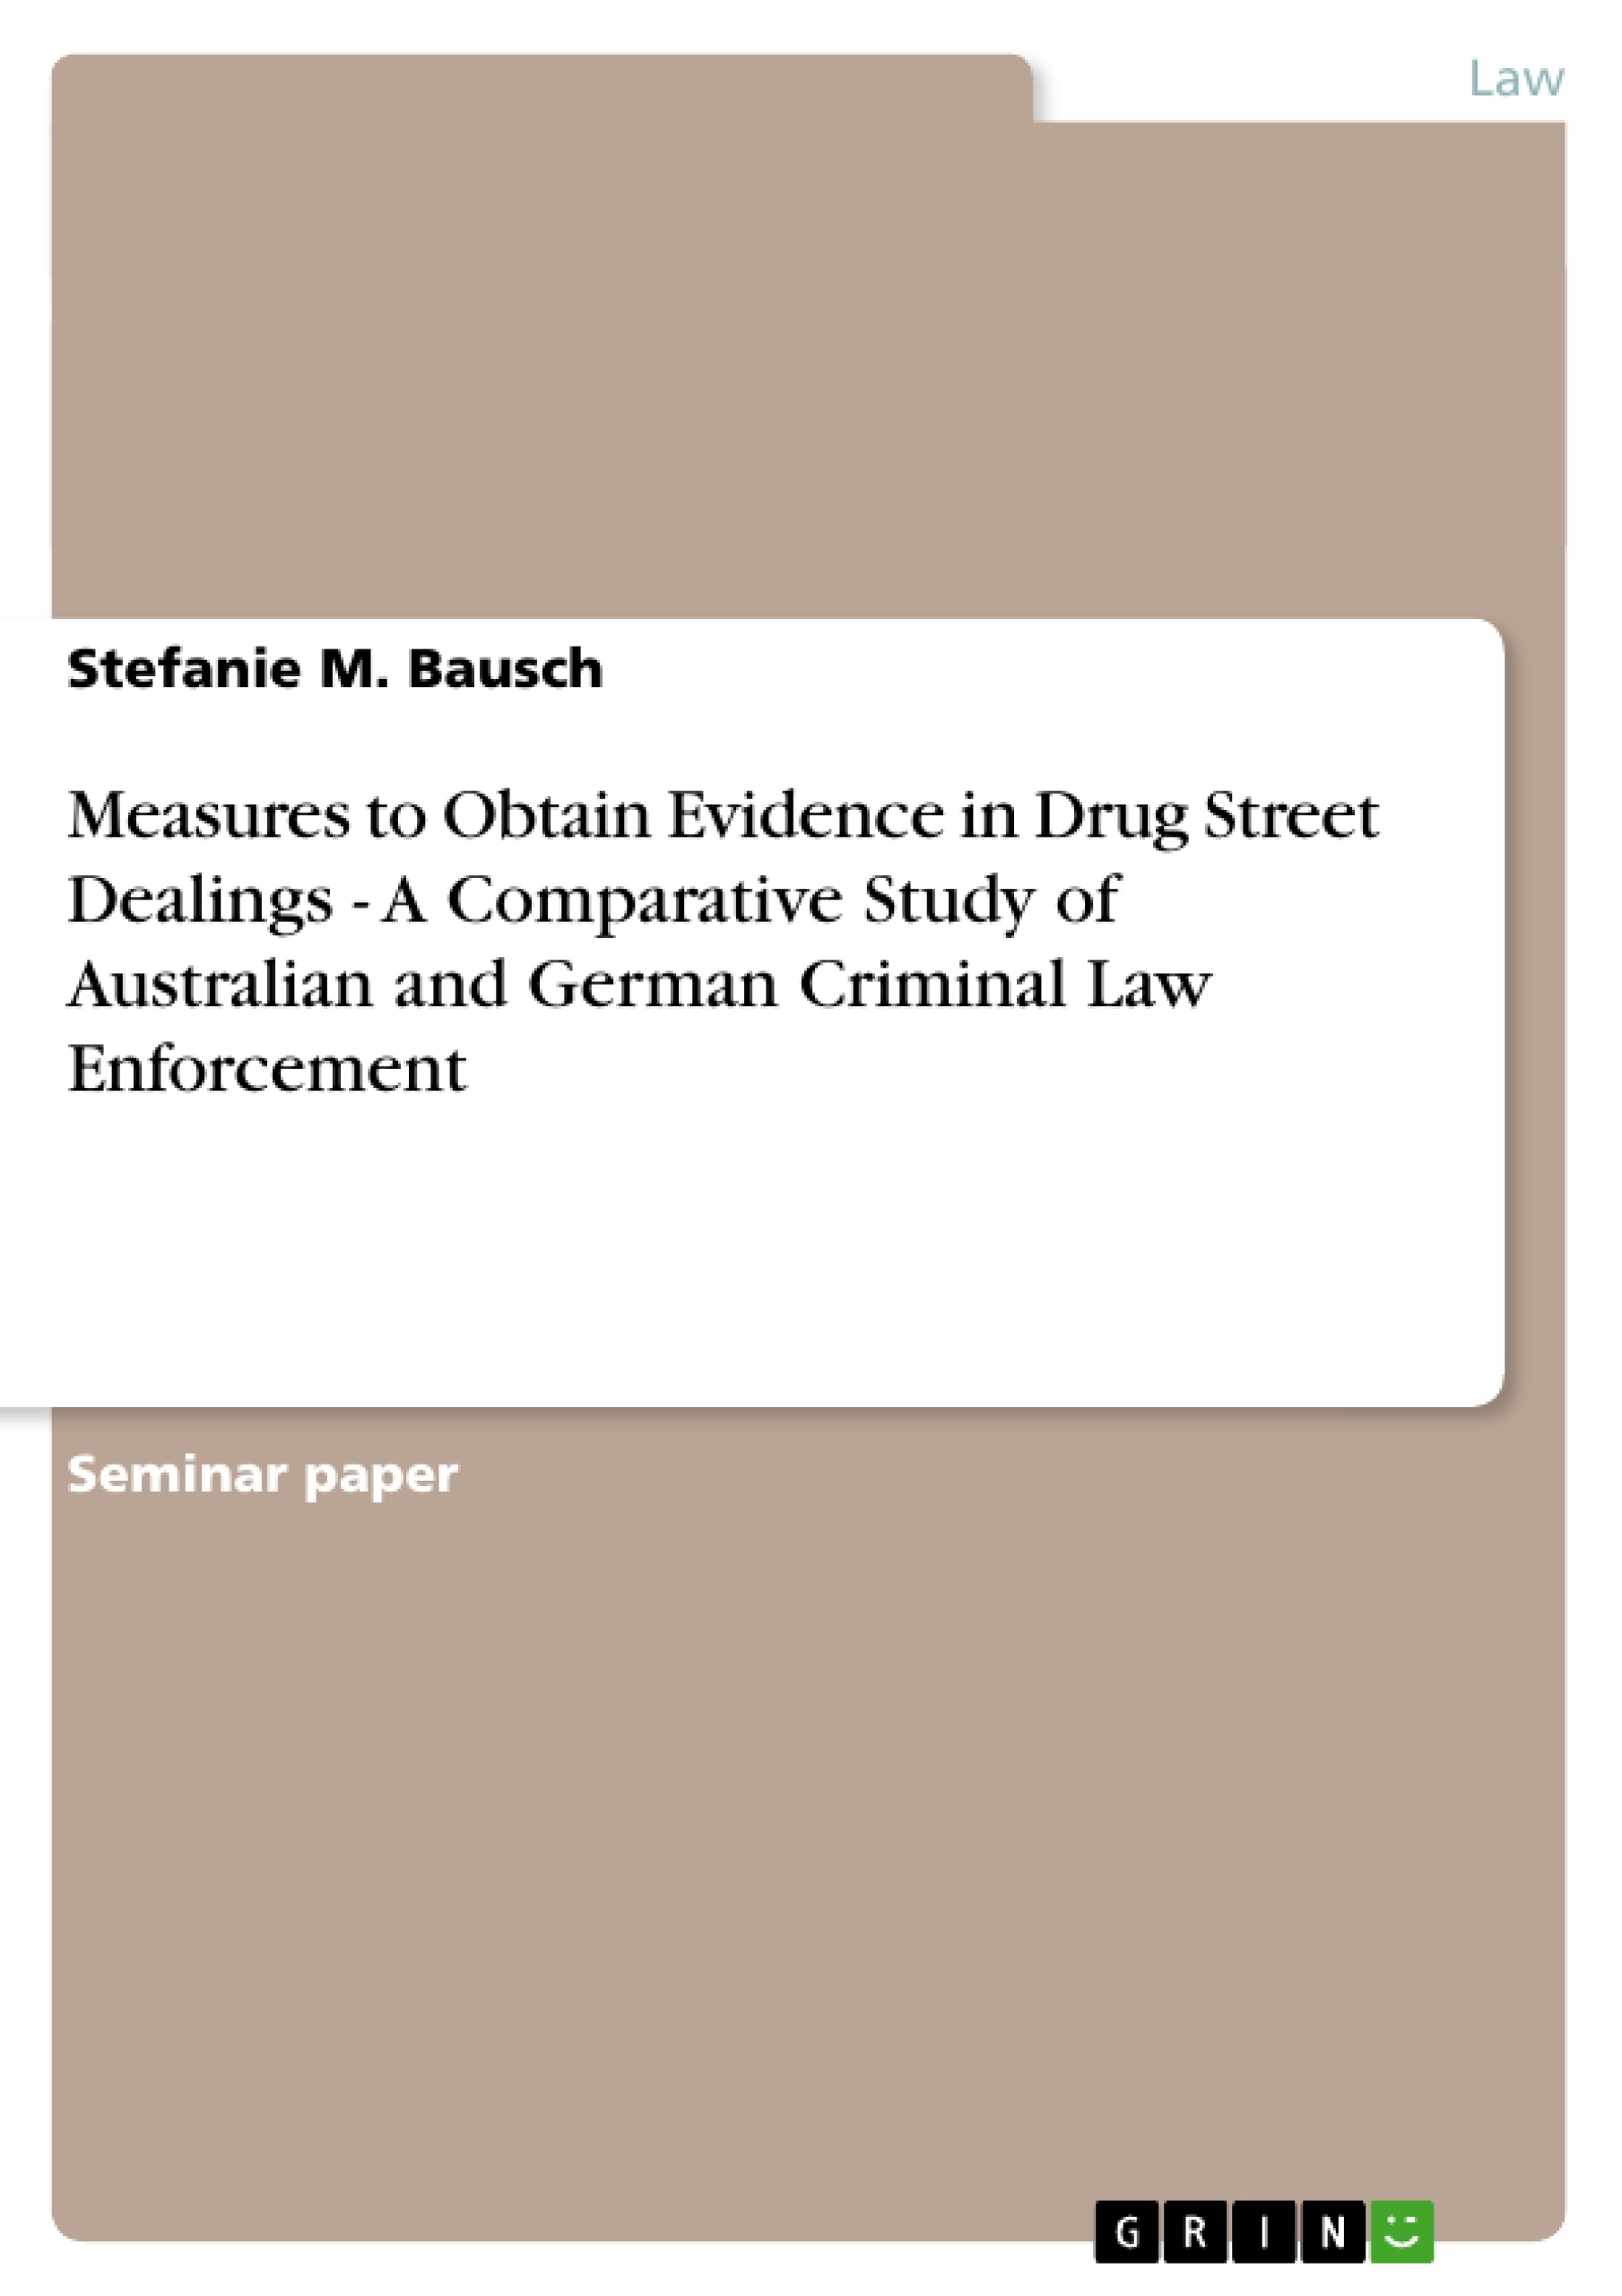 Title: Measures to Obtain Evidence in Drug Street Dealings - A Comparative Study of Australian and German Criminal Law Enforcement